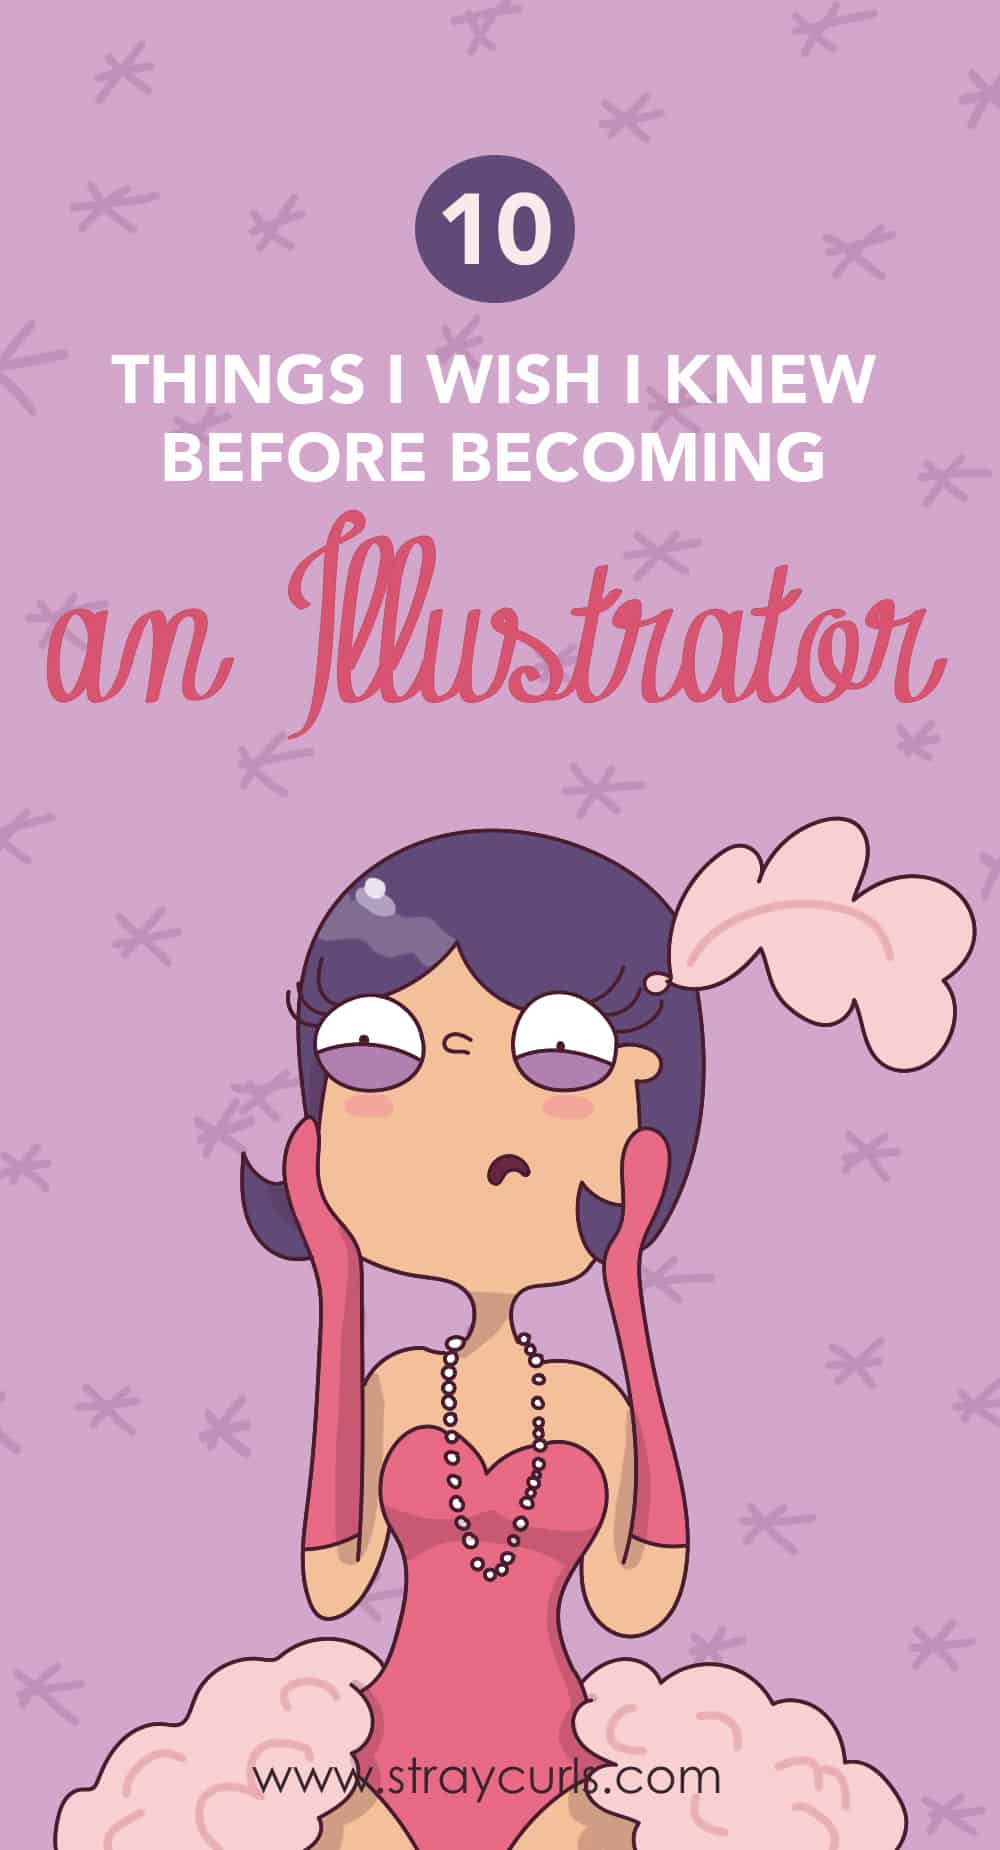 Are you an Illustrator ready to step out into the world? Then you must know these 10 things before becoming an Illustrator!